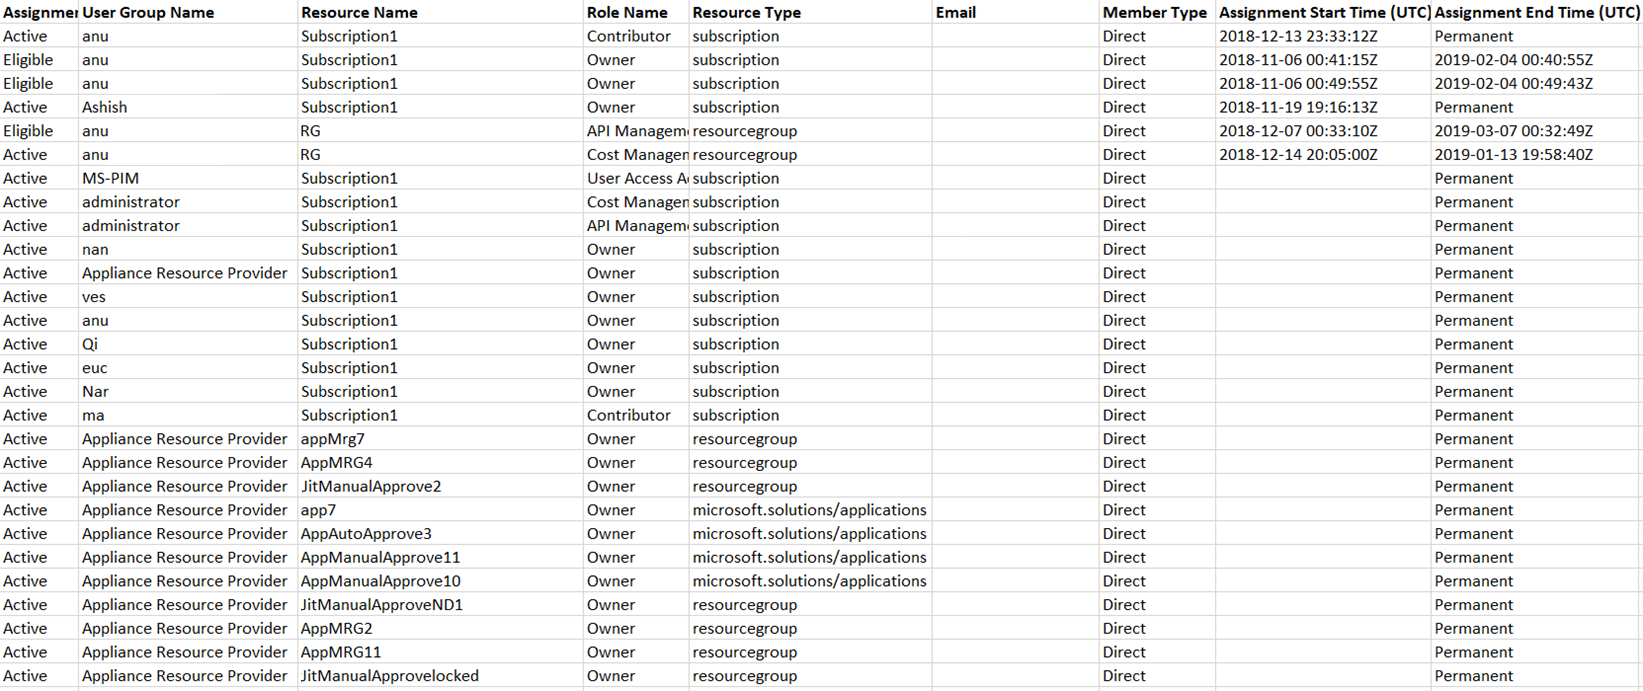 Screenshot of a csv file showing all role assignments that PIM exported.